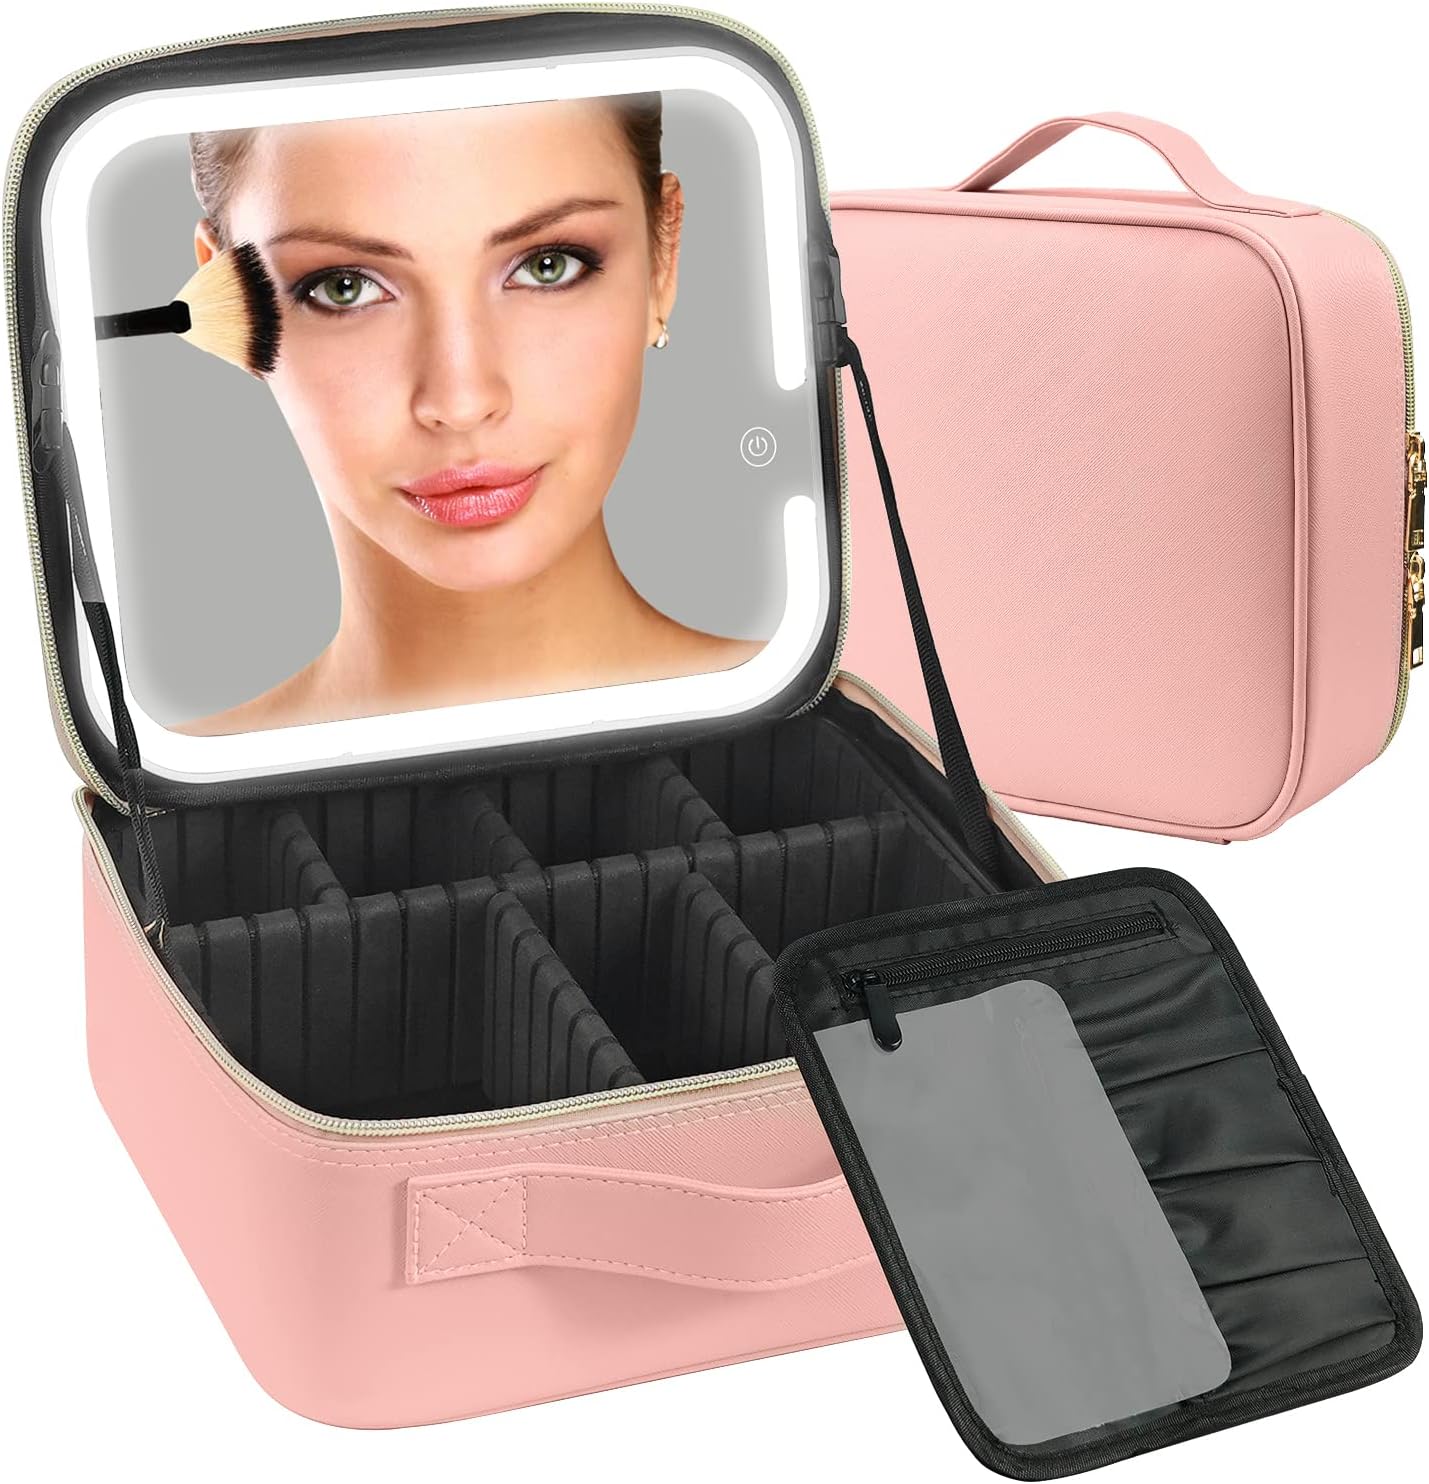 4K silver plated cosmetic mirror makeup travel bag